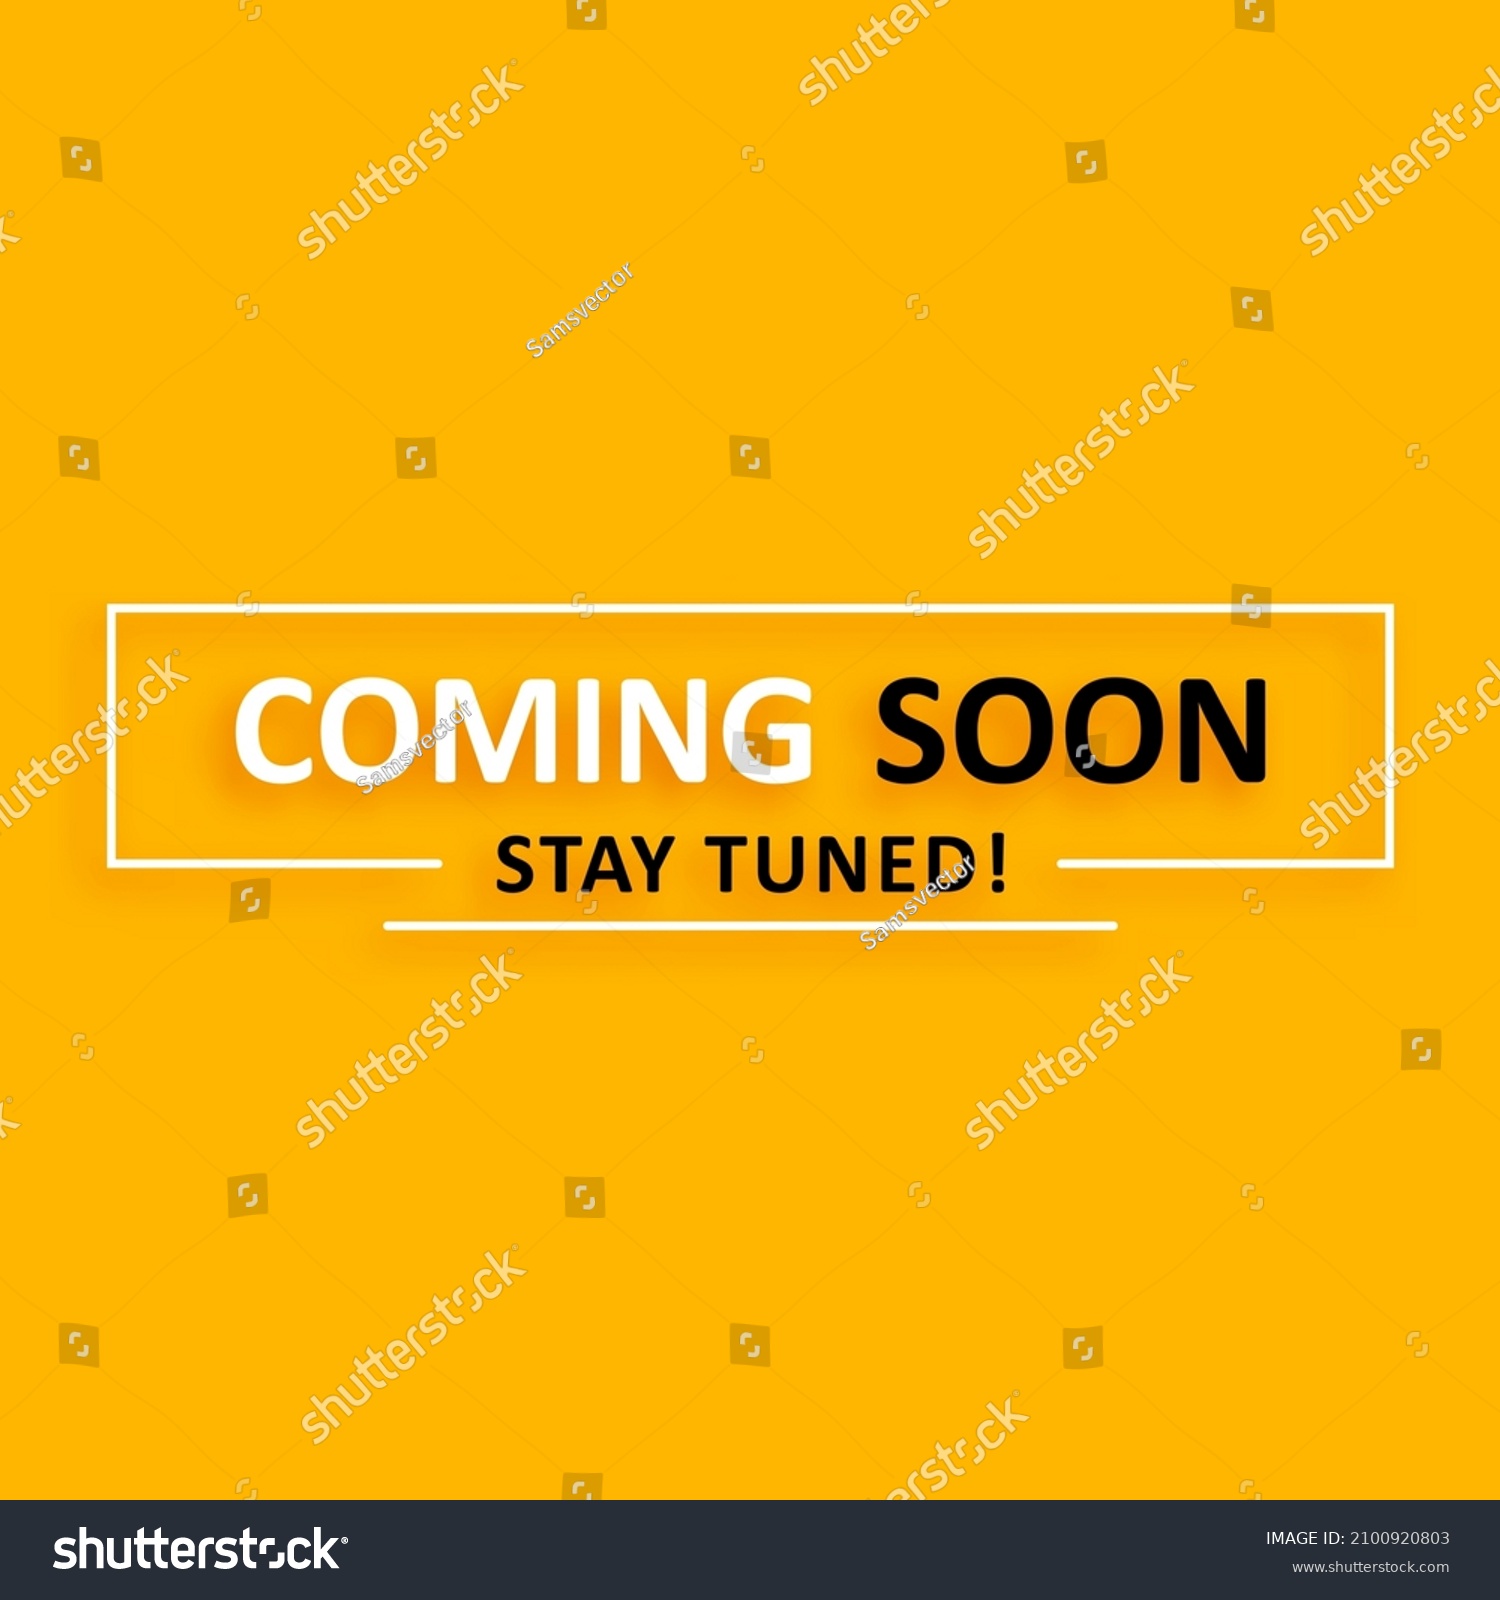 SVG of Coming soon. Vector illustration on a yellow background with minimalistic shapes svg